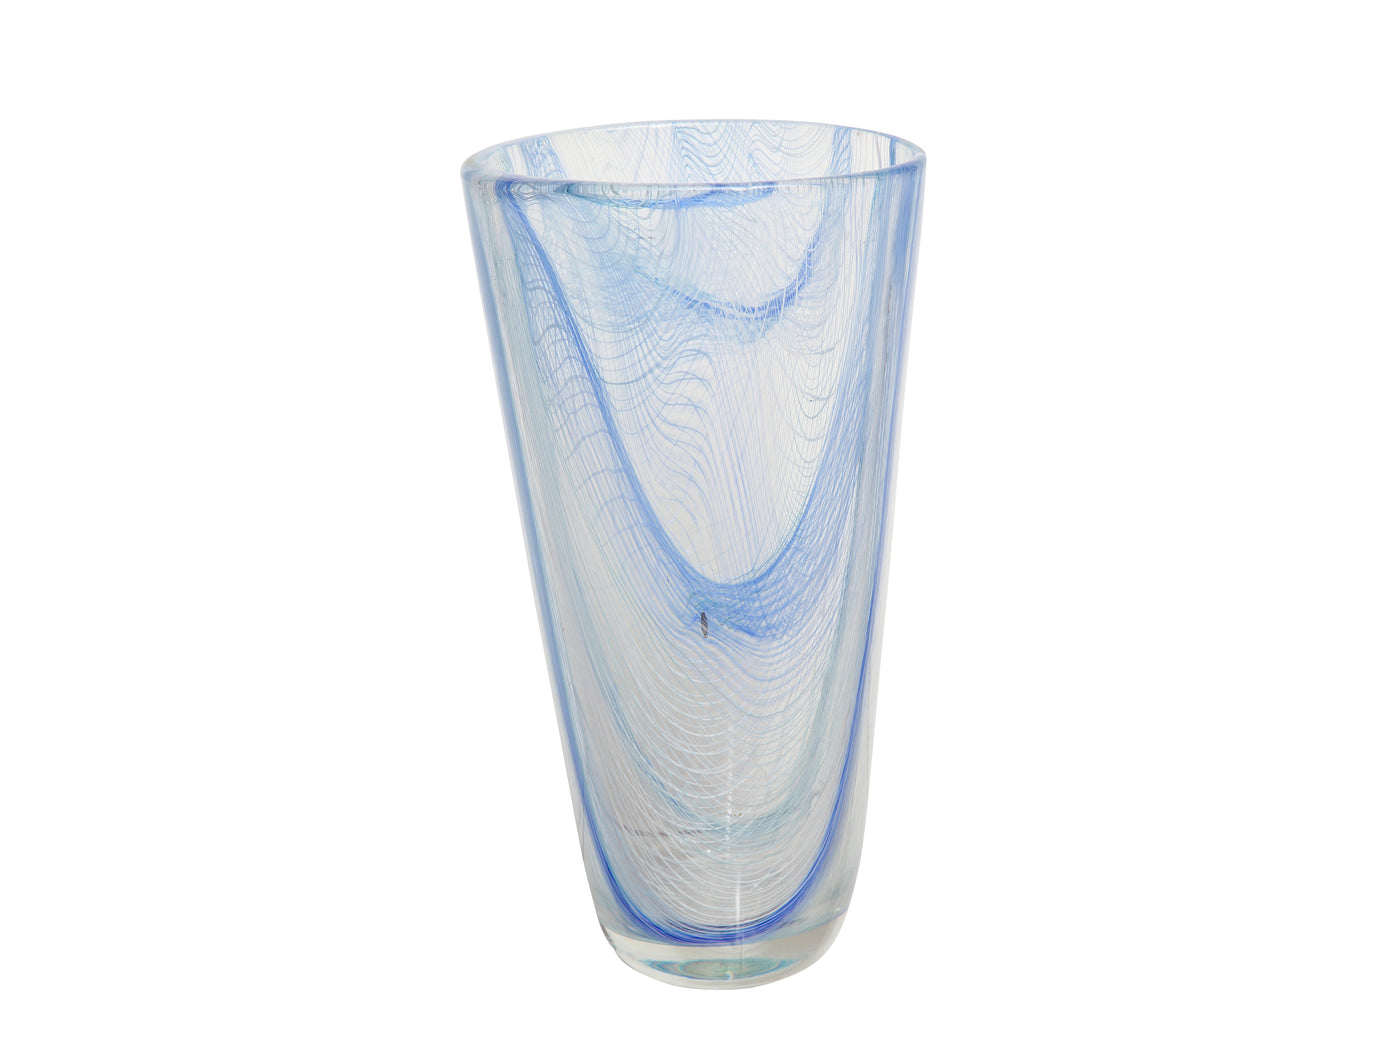 LARGE-SCALE "MERLETTO" GLASS VASE BY ROMANO DONA